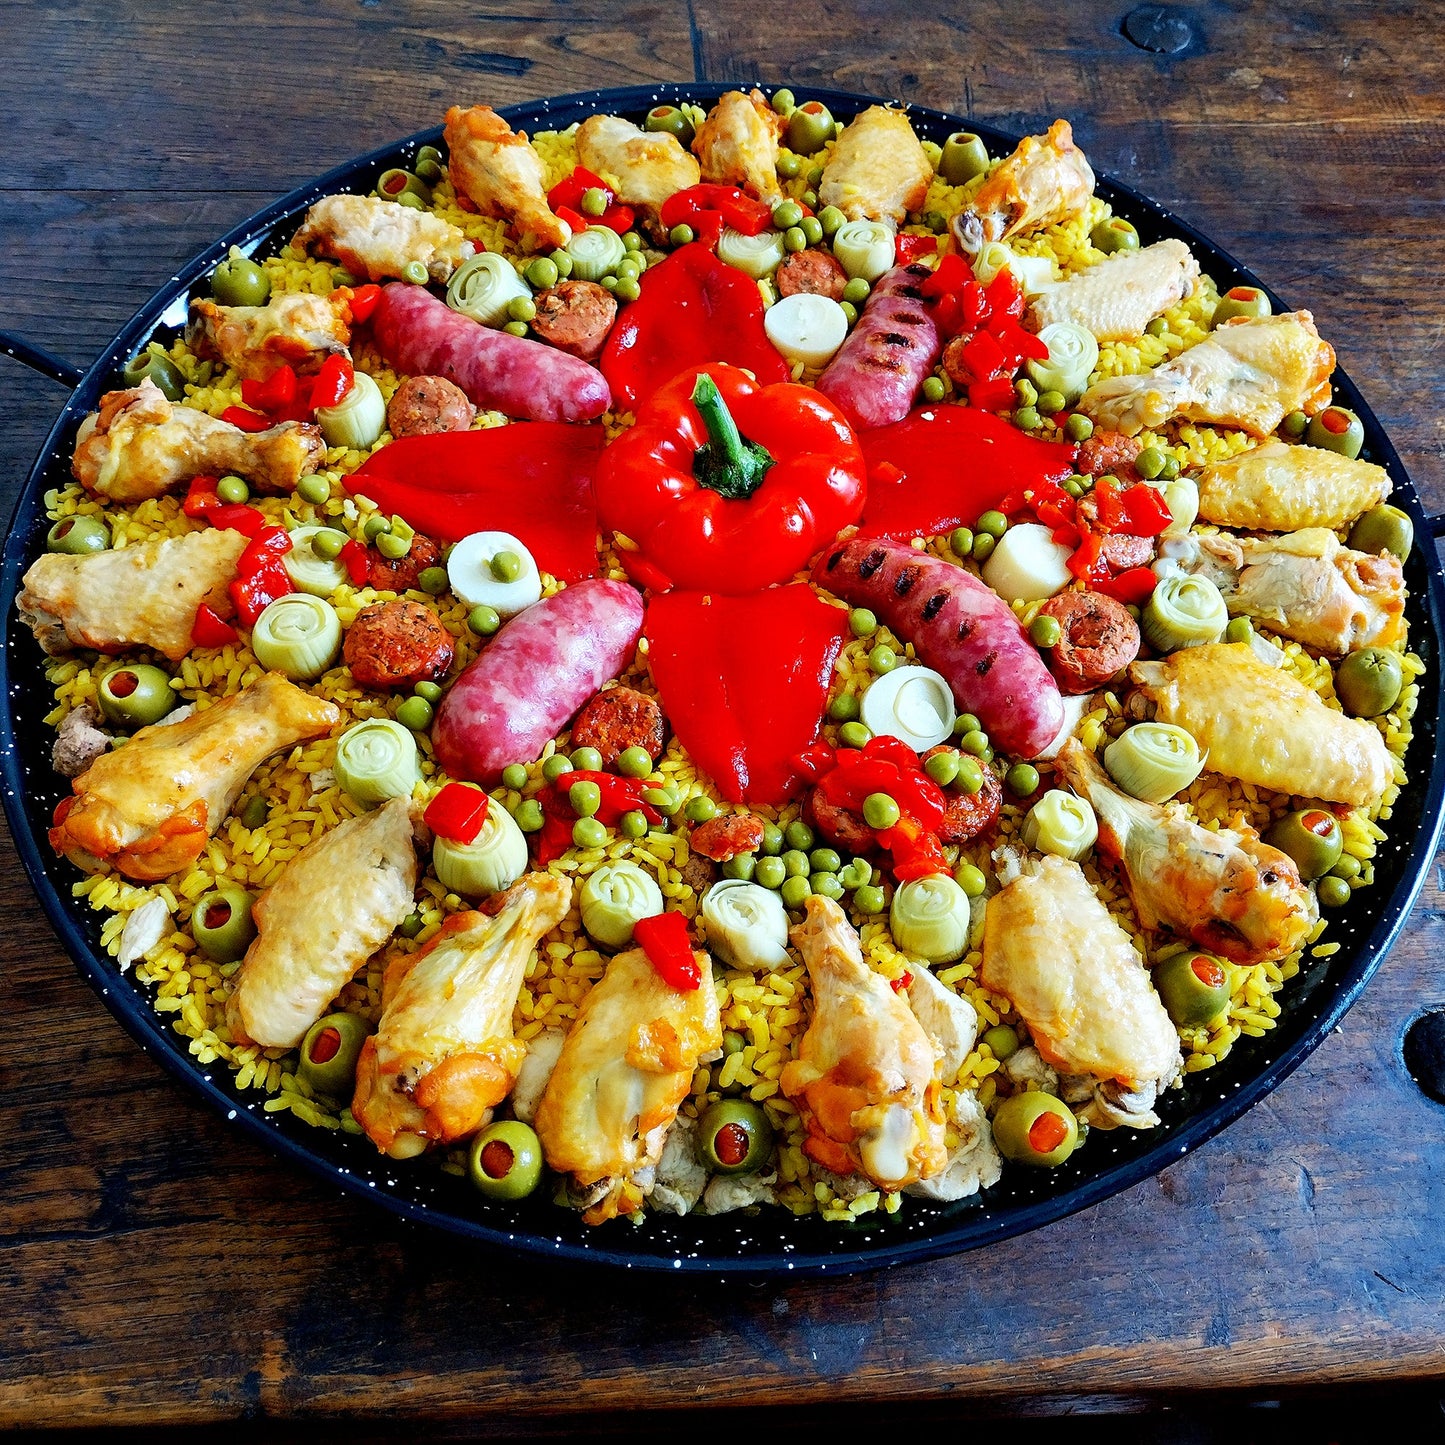 Deluxe paella. Set of six for 75 guests. Paella 2. Argentine chorizo, chicken, artichoke hearts, hearts of palm, piquillo peppers.